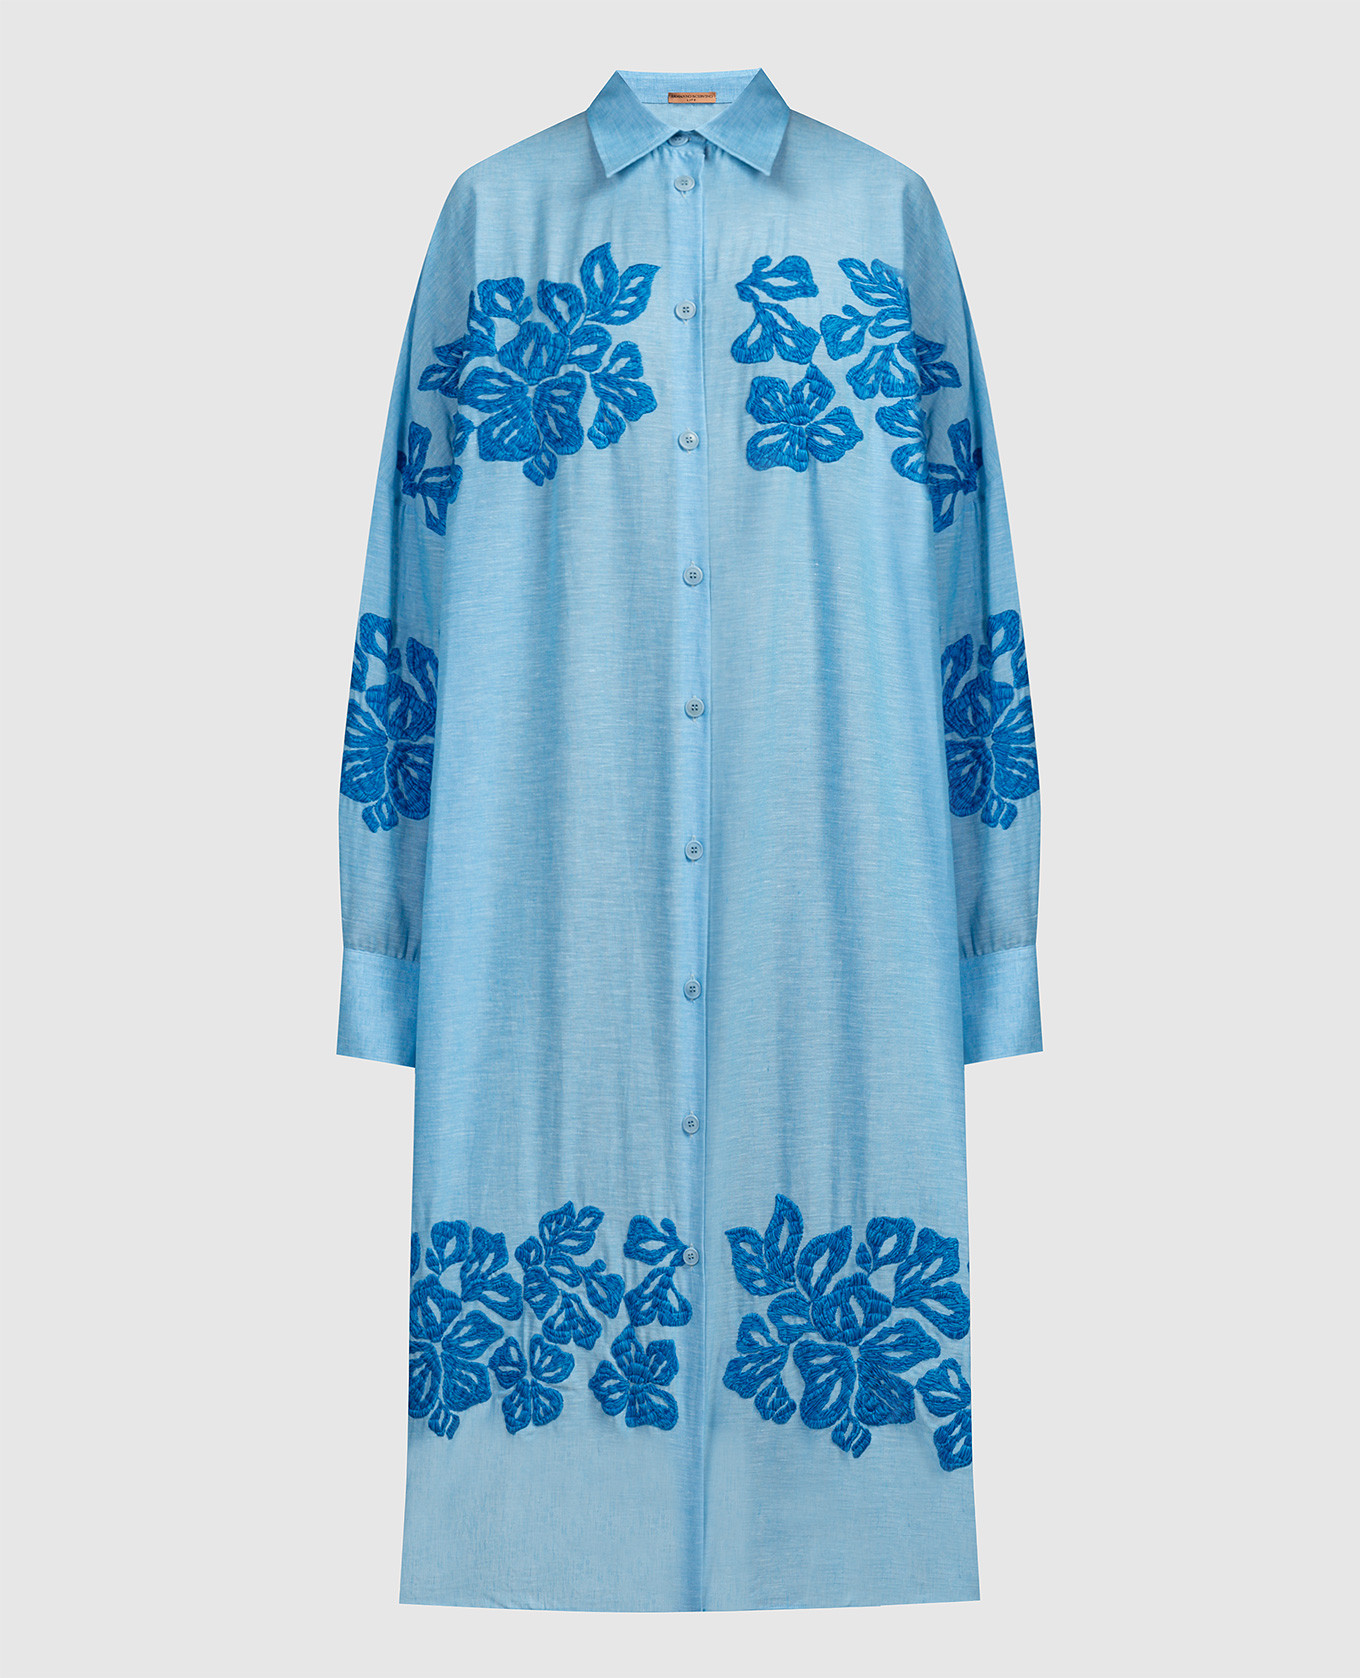 Blue linen shirt dress with embroidery